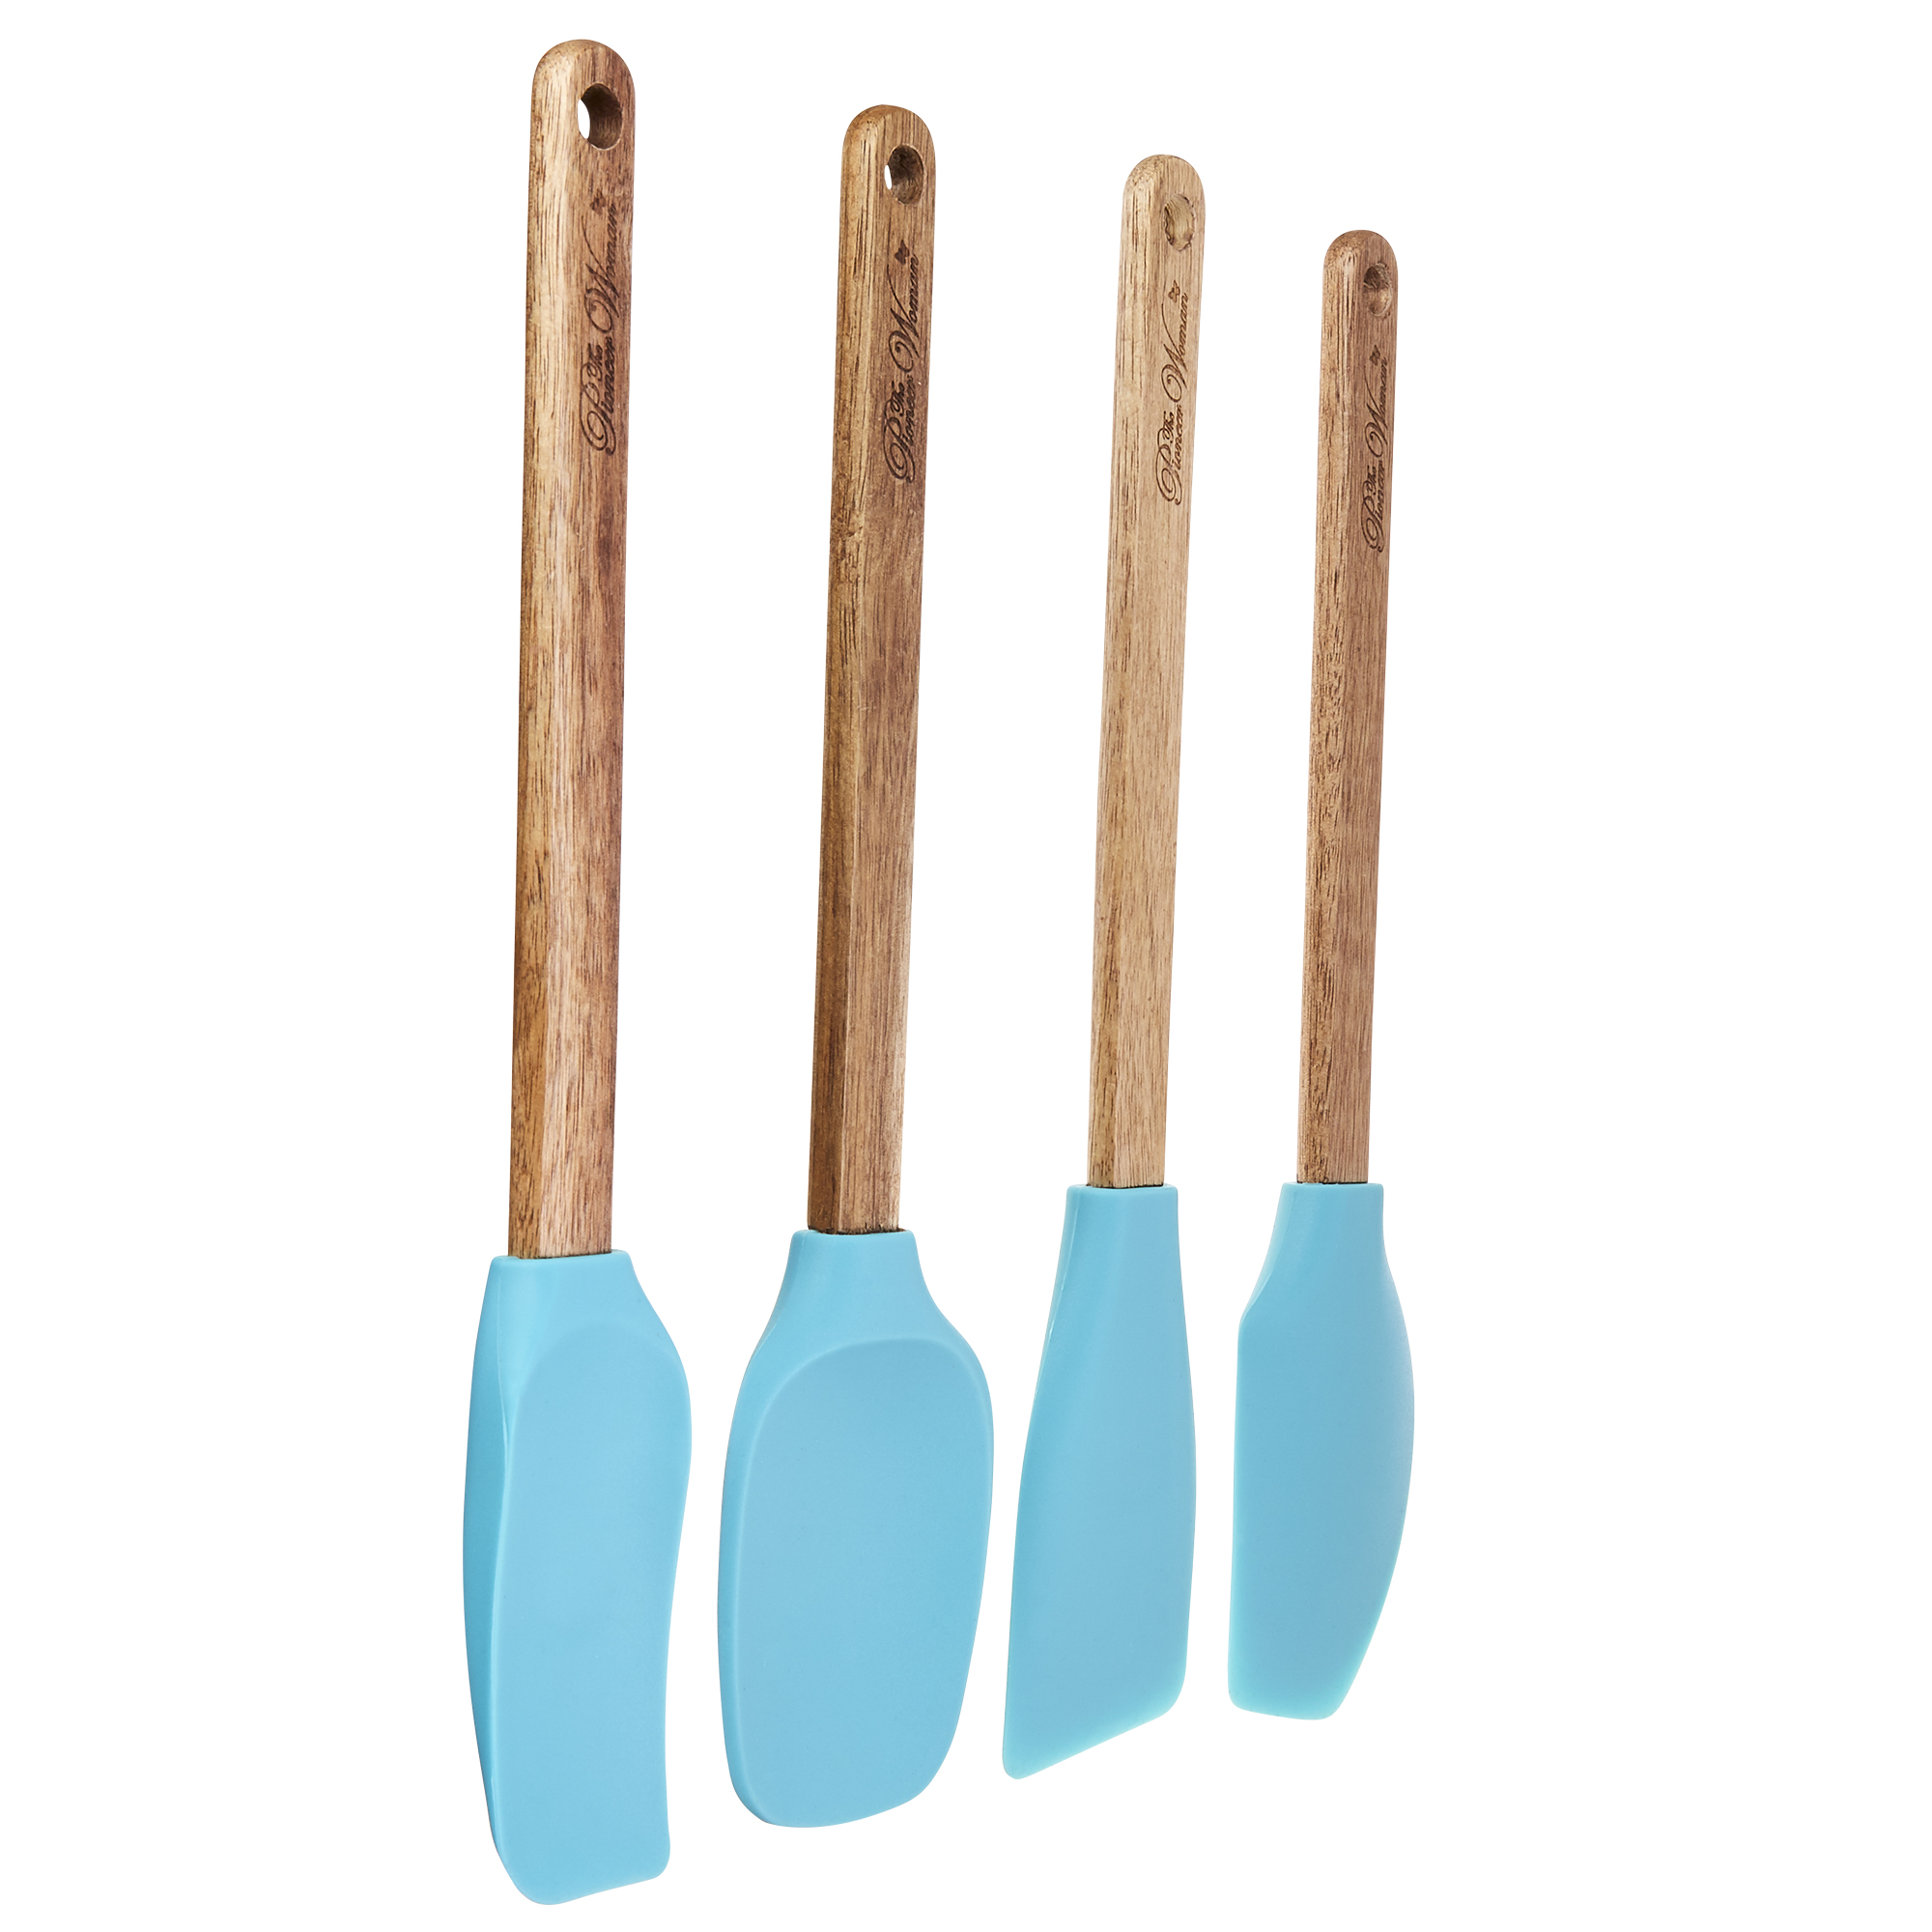 The Pioneer Woman 4-Piece Silicone Spatula Set with Acacia Wood Handles, Assorted Colors - image 1 of 12